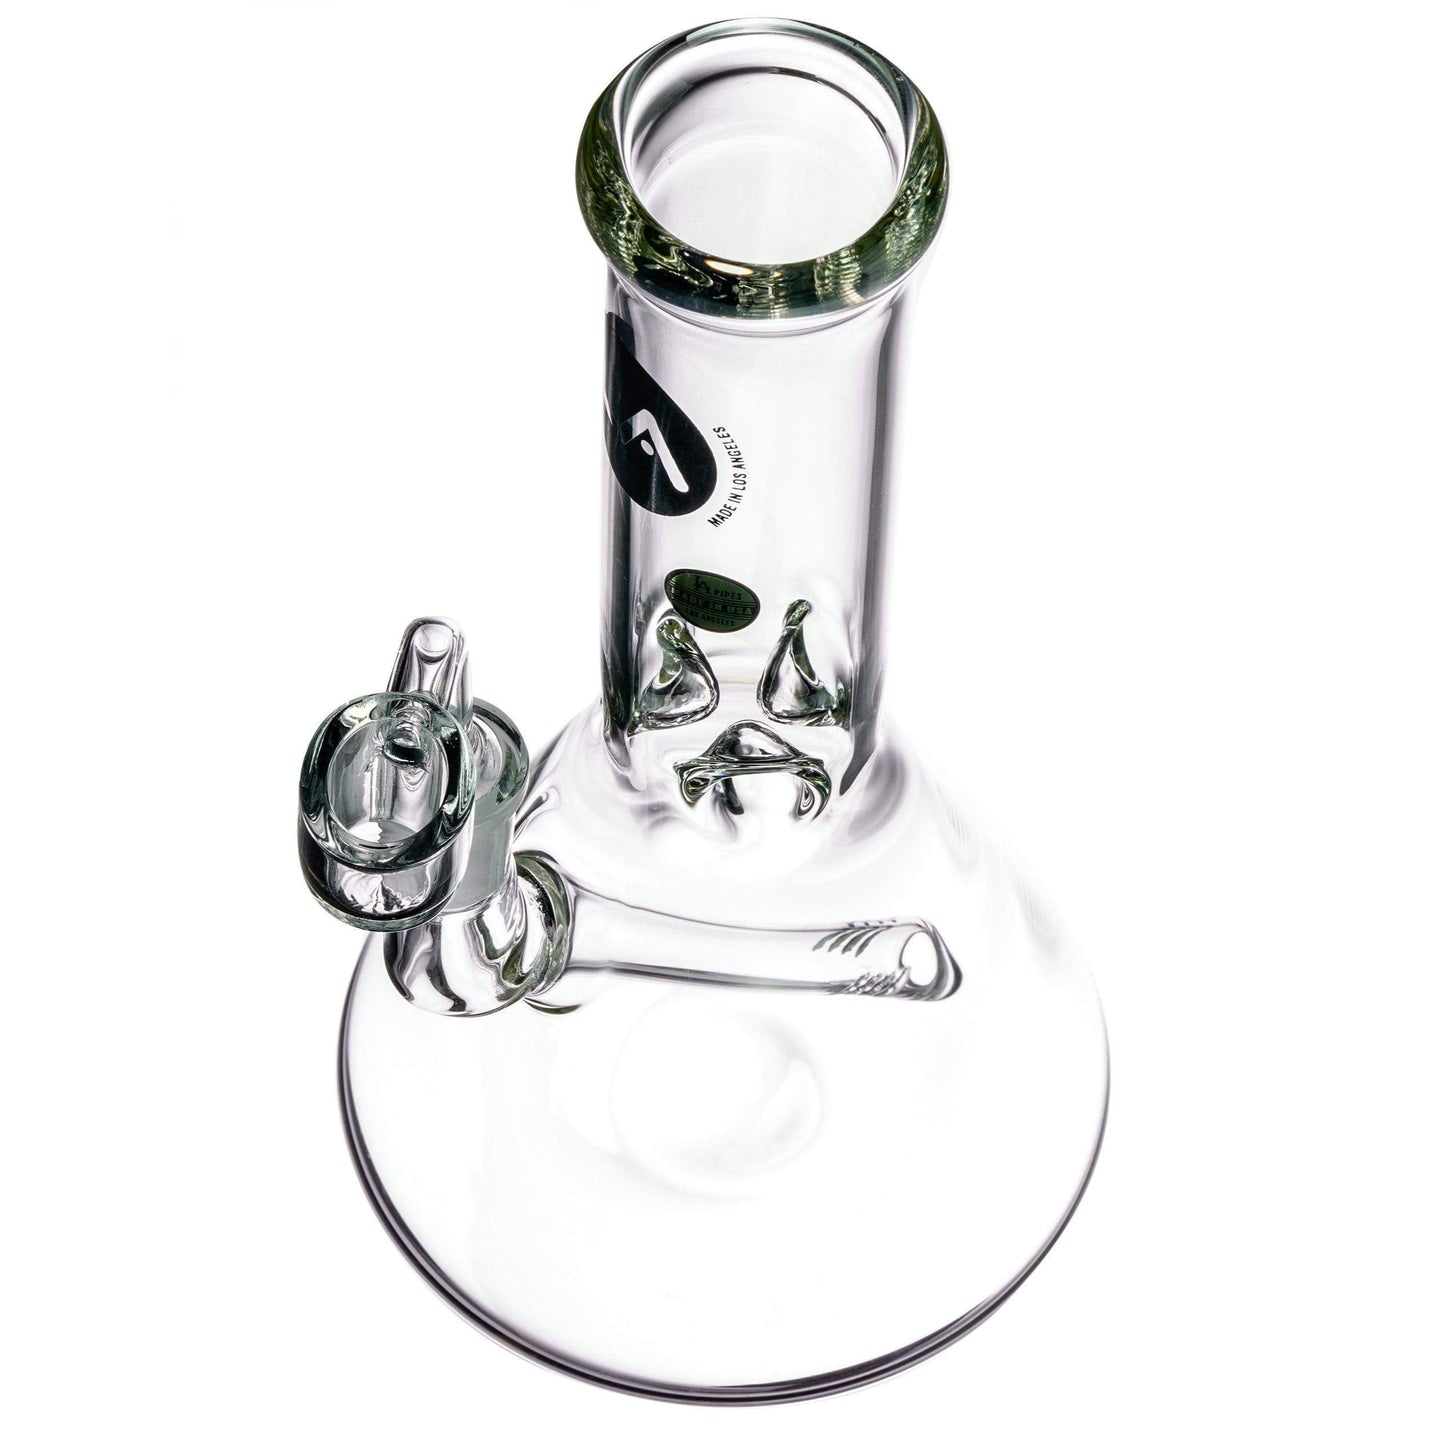 LA Pipes 8” Concentrate Beaker Rig by LA Pipes | Mission Dispensary